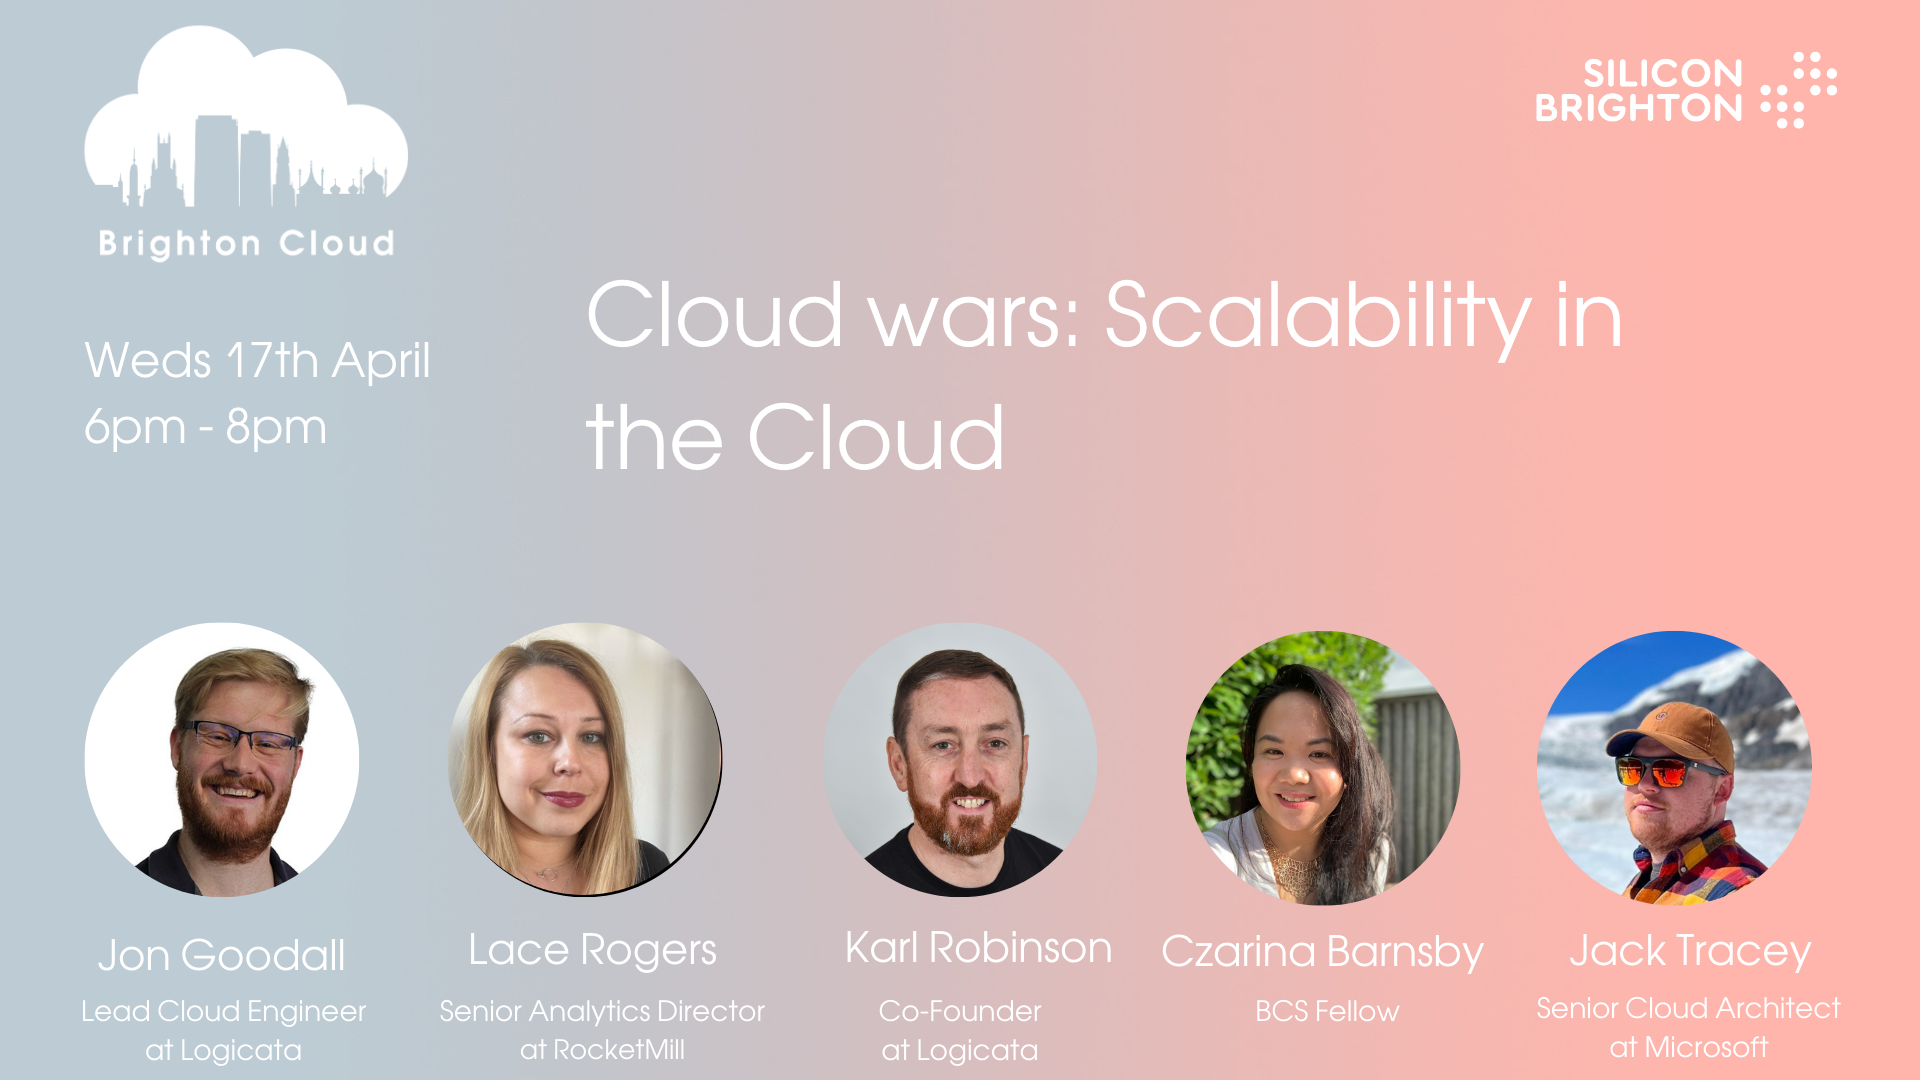 Cloud wars: Scalability in the Cloud